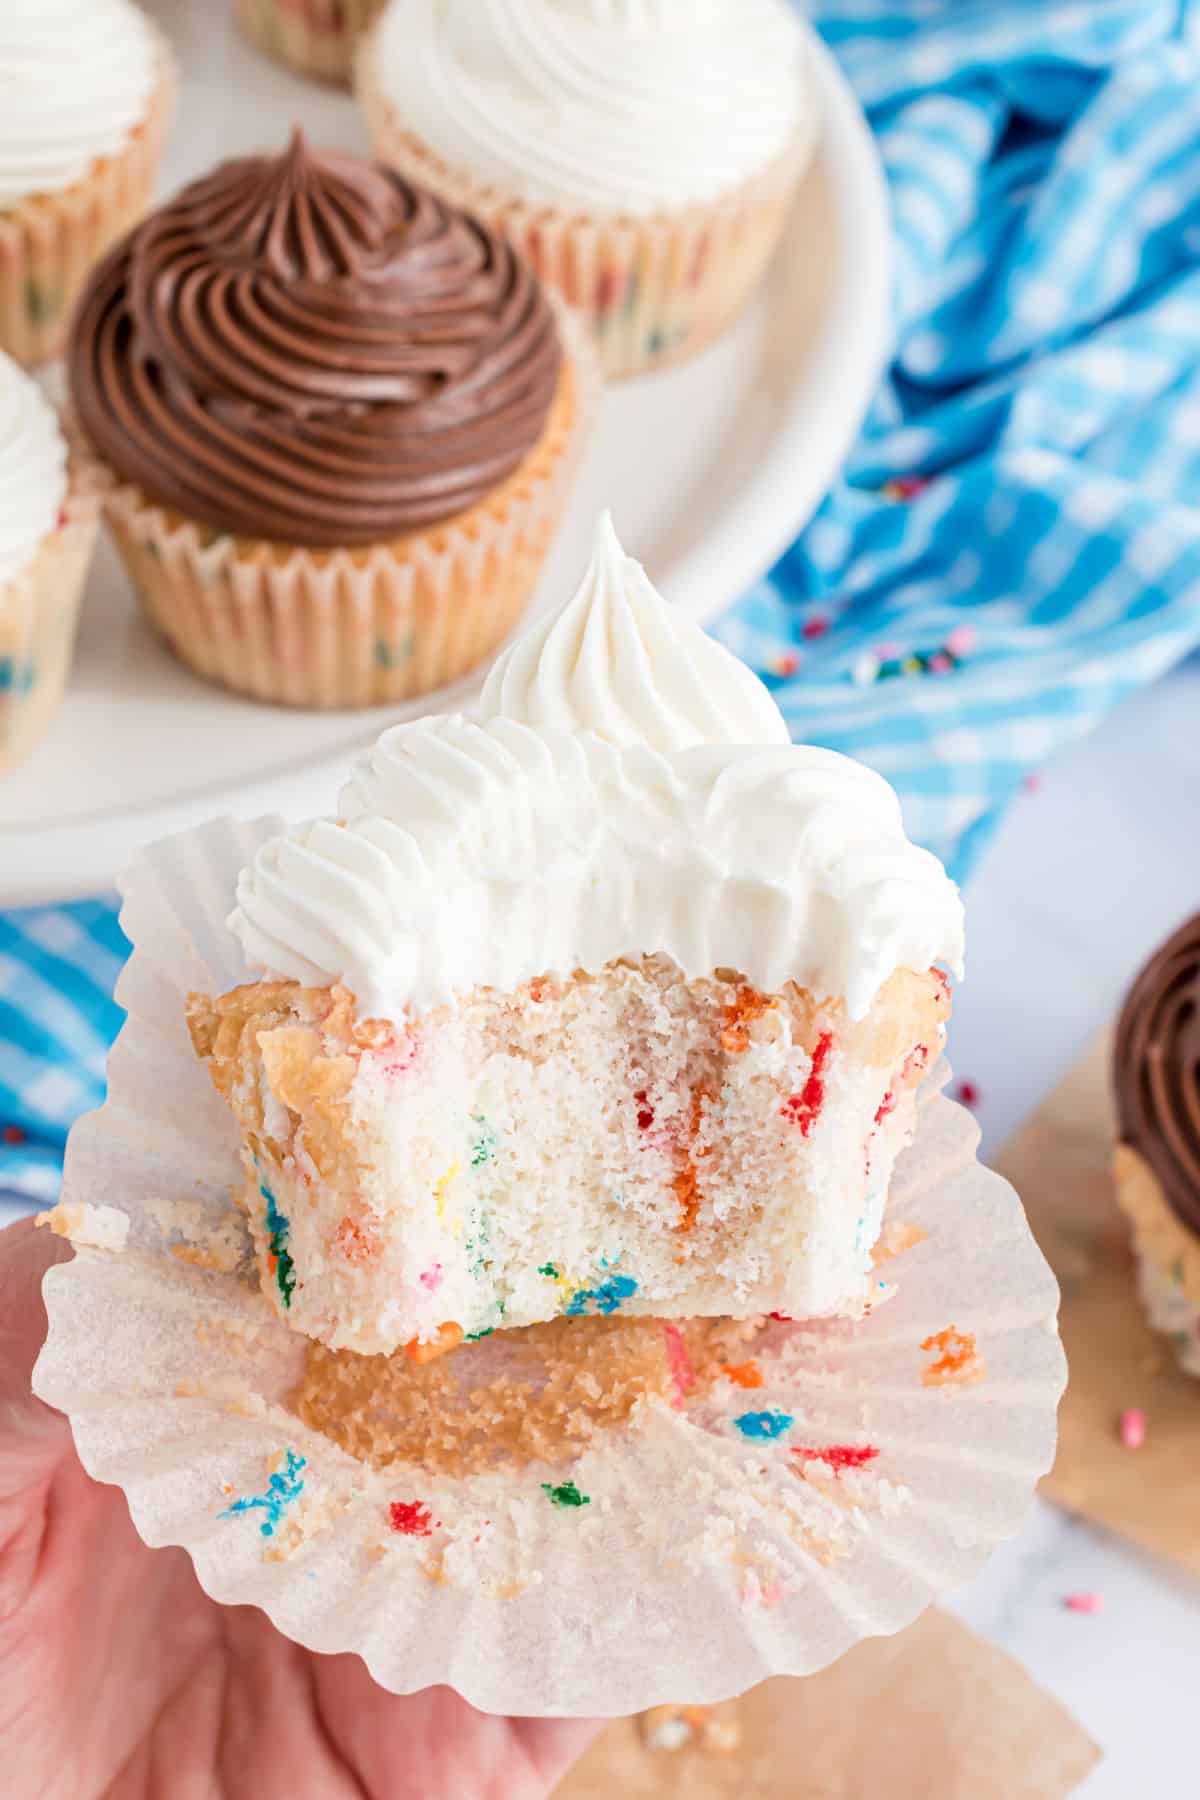 Funfetti cupcake with vanilla frosting and a bite taken out.